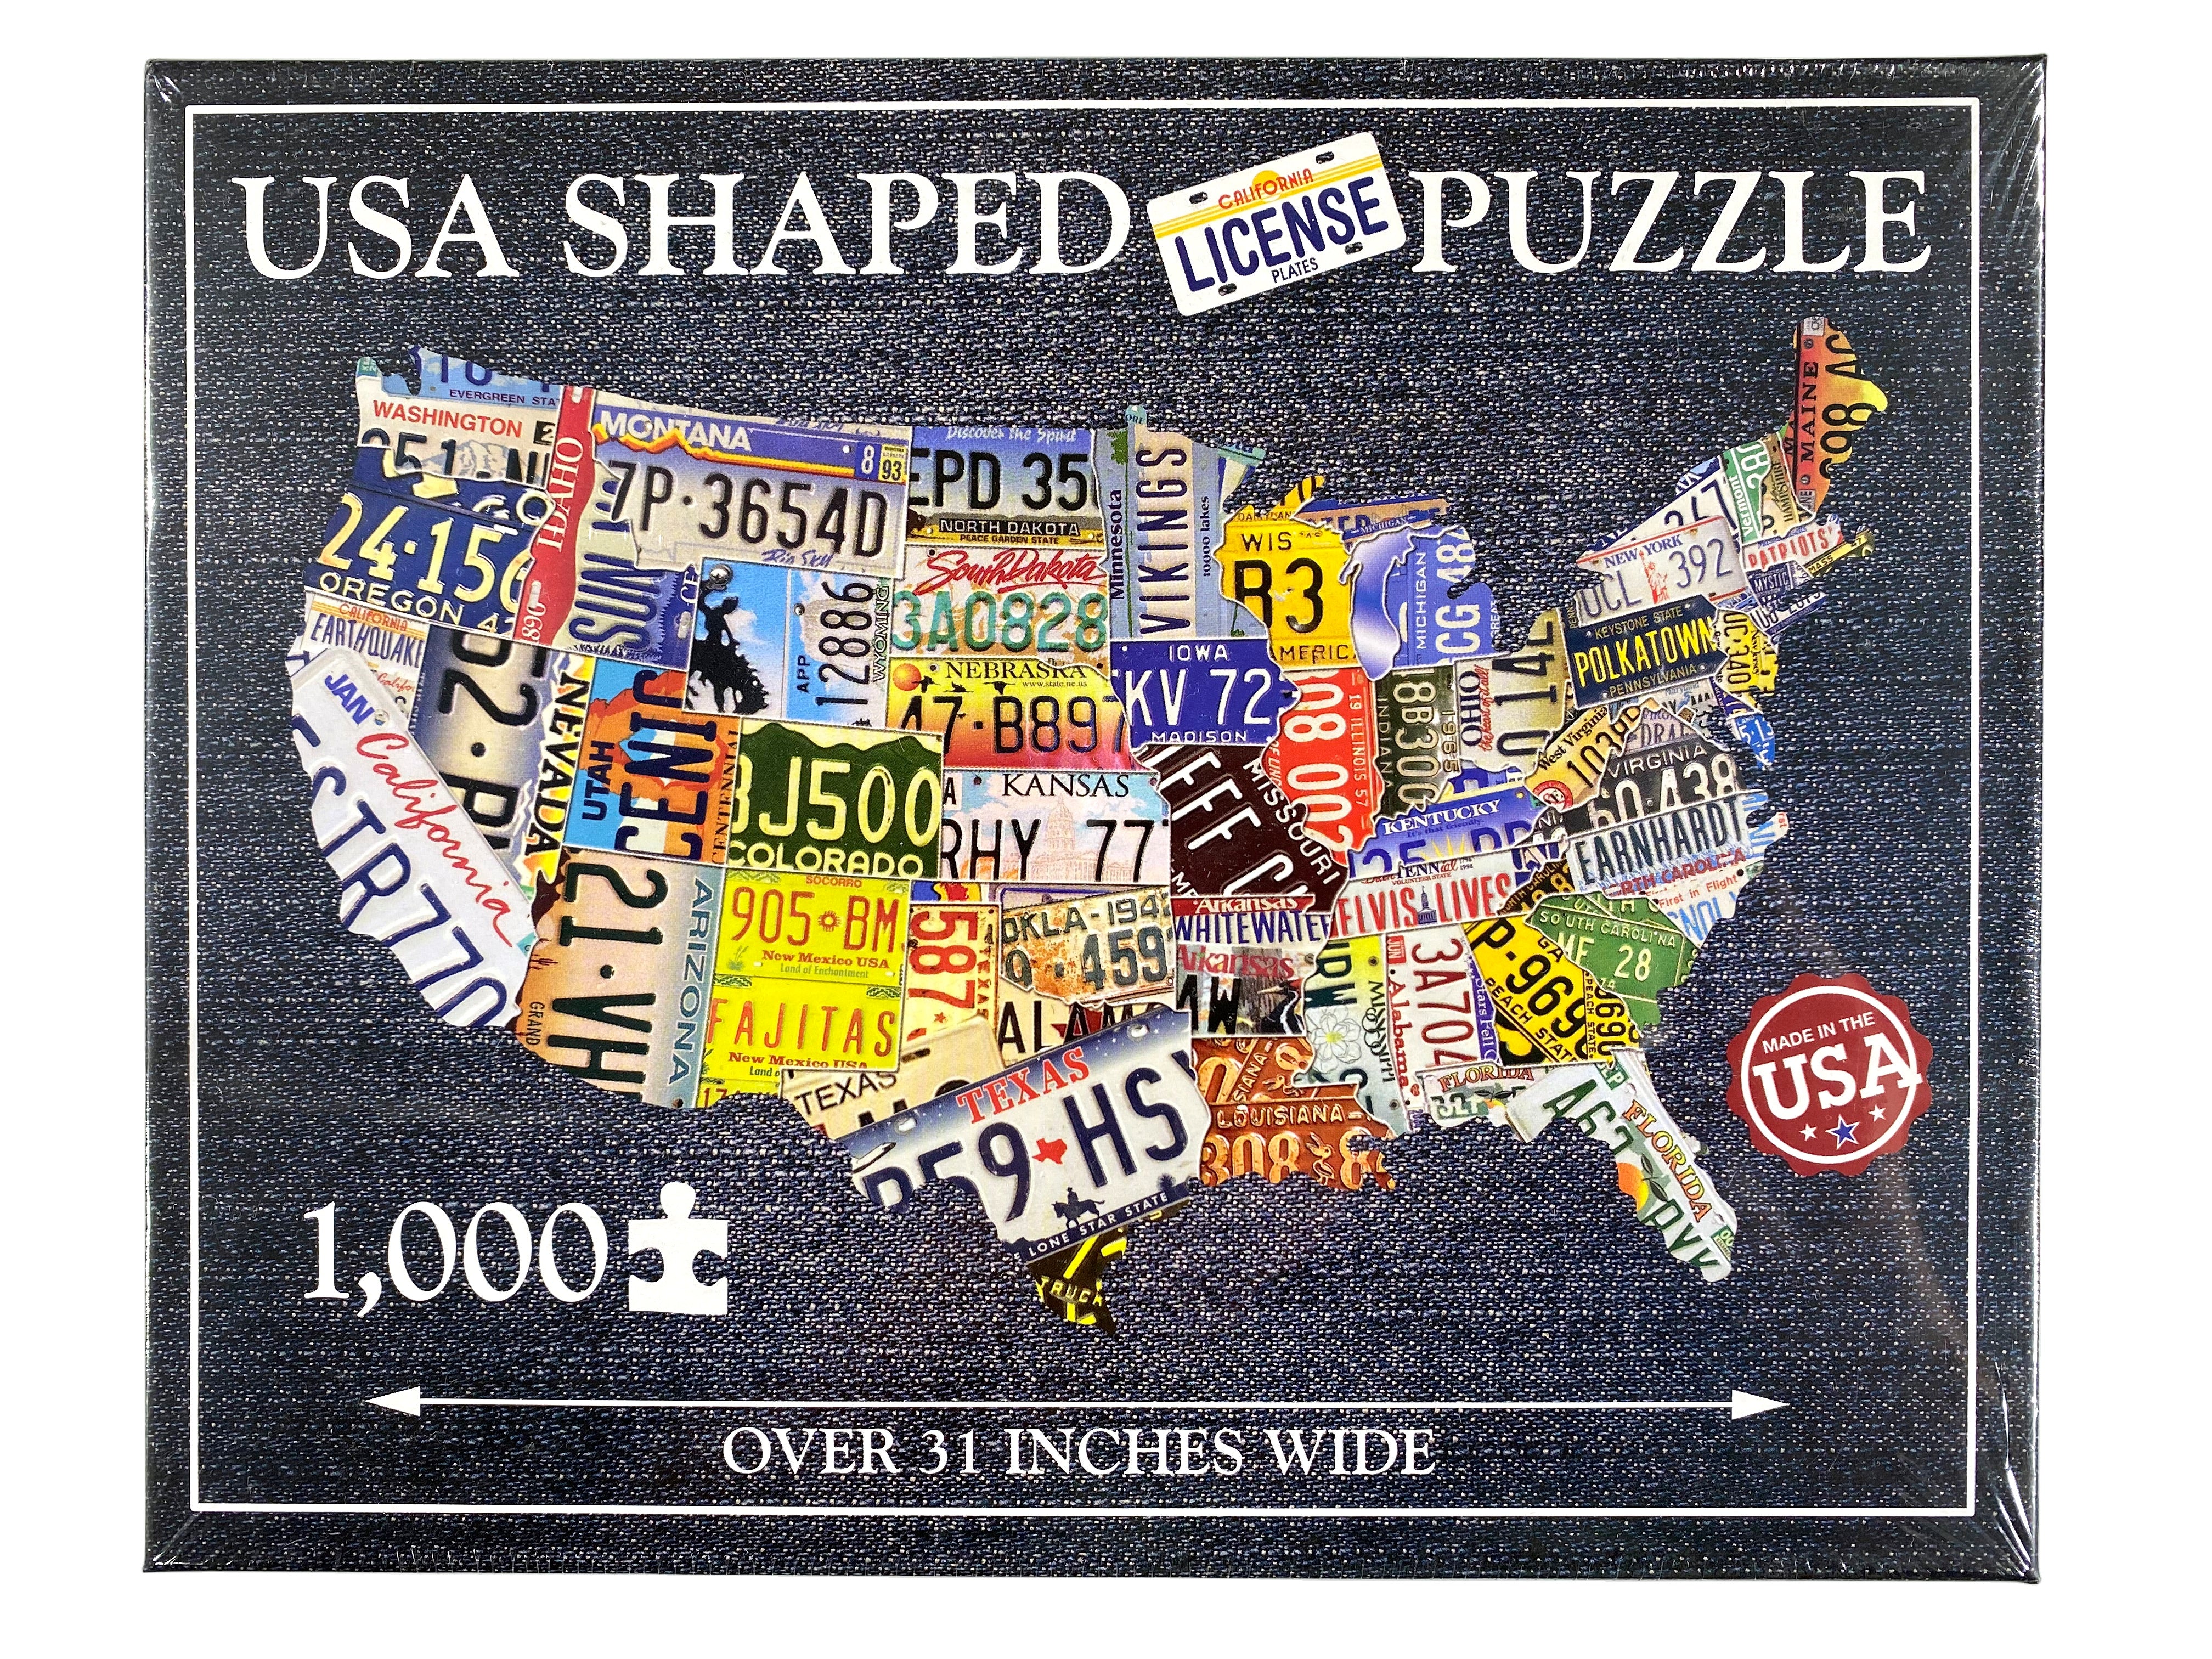 USA Shaped License Plate 1000 Piece Puzzle    